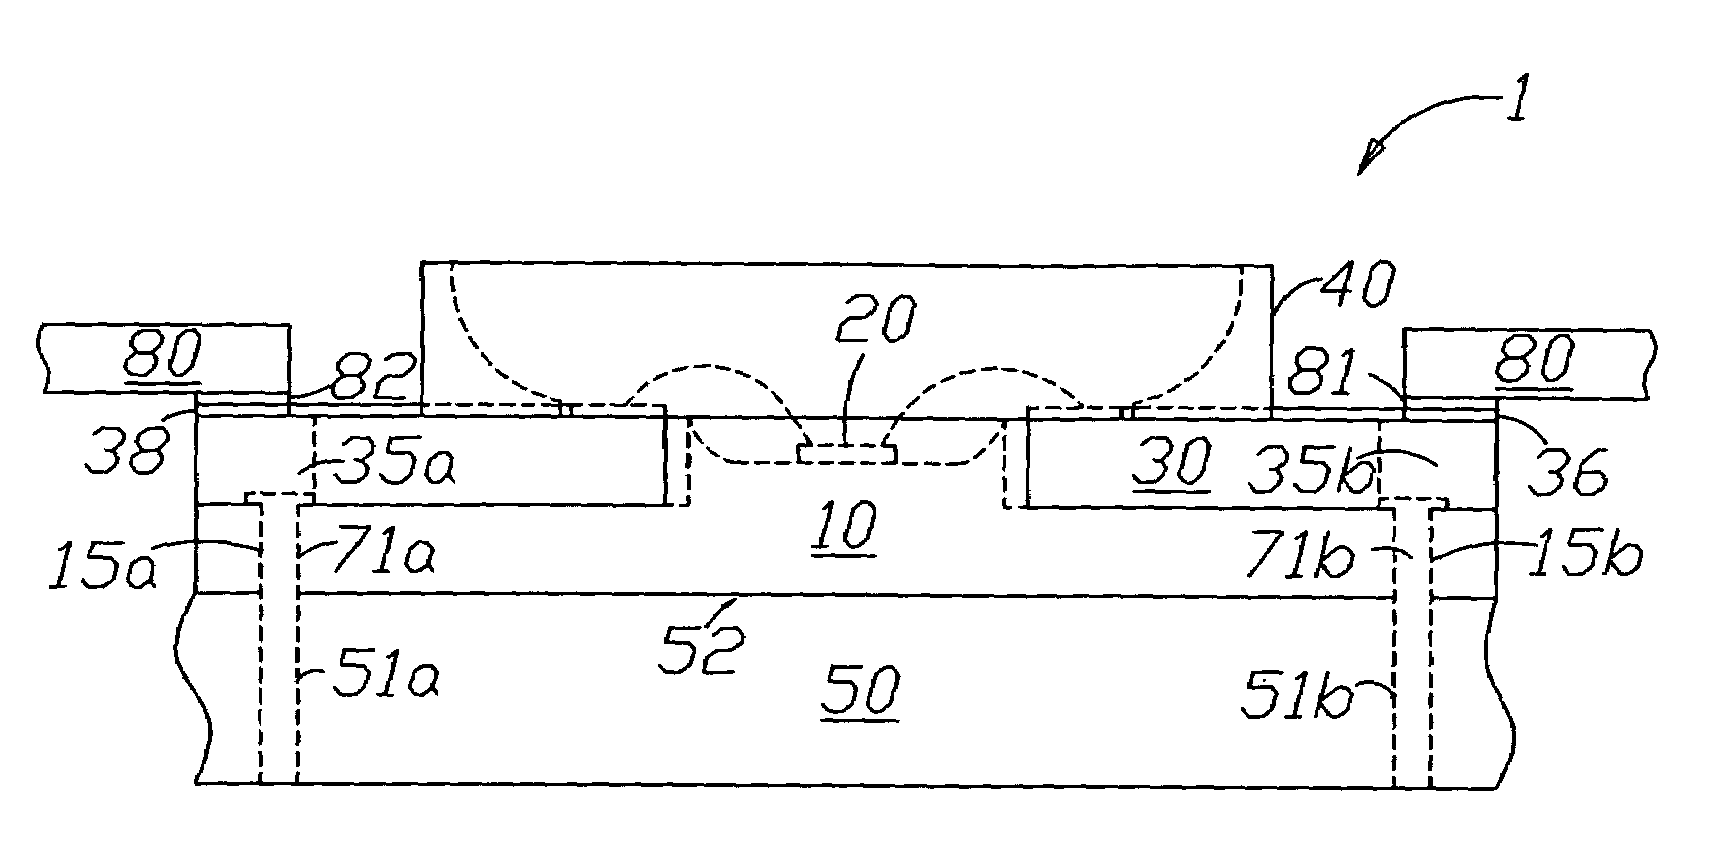 SMD(surface mount device)-type light emitting diode with high heat dissipation efficiency and high power